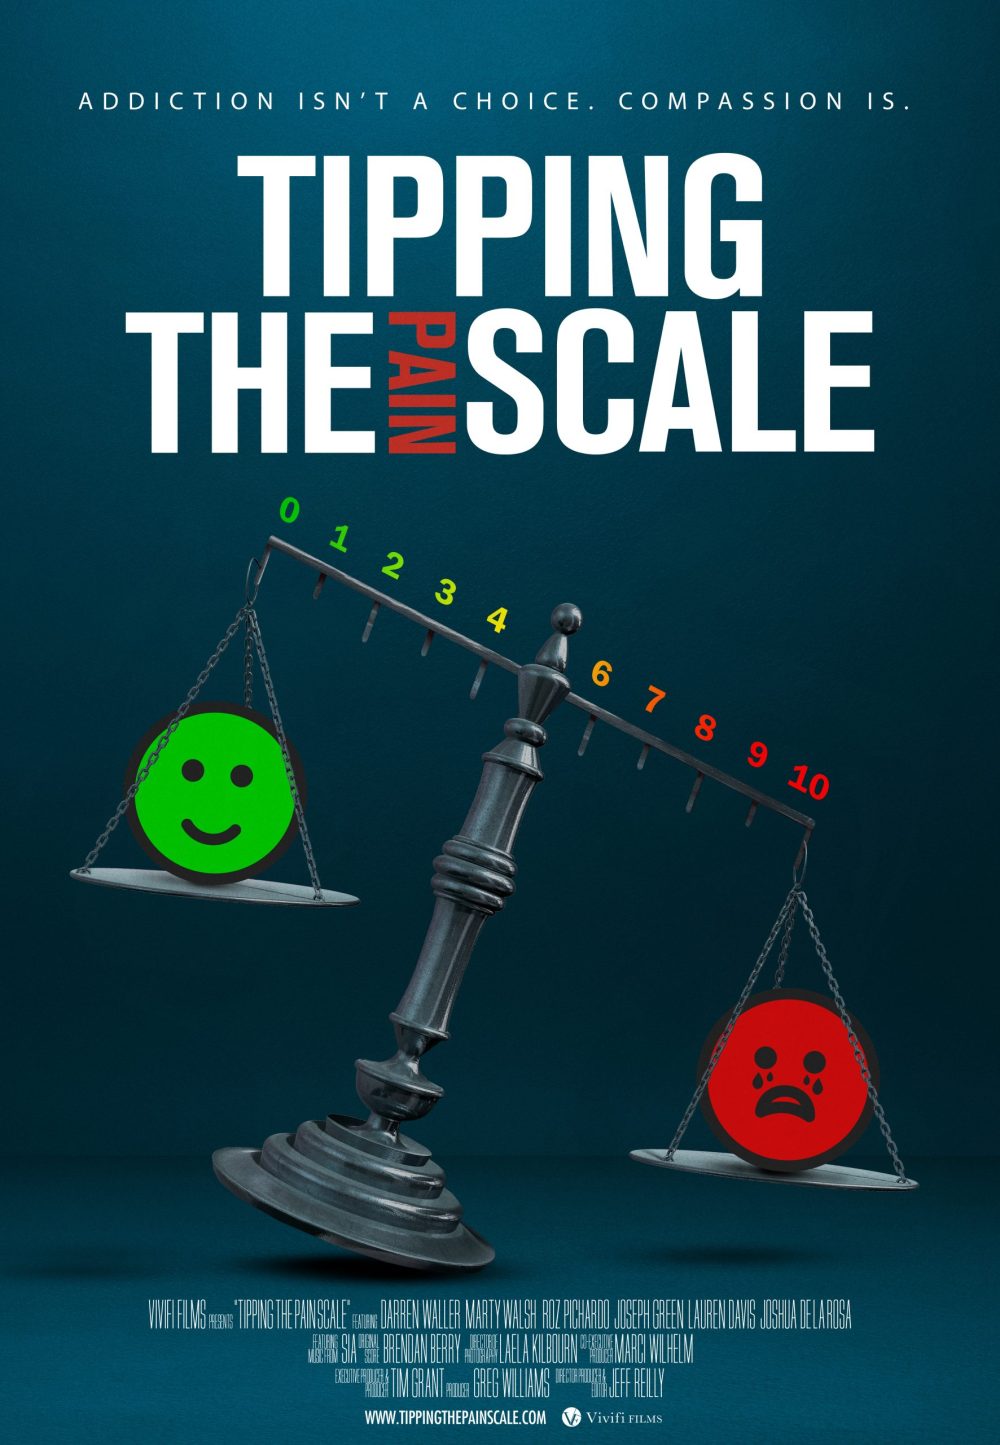 The Center for Rural Education at Virginia Tech presents: Tipping the Pain Scale